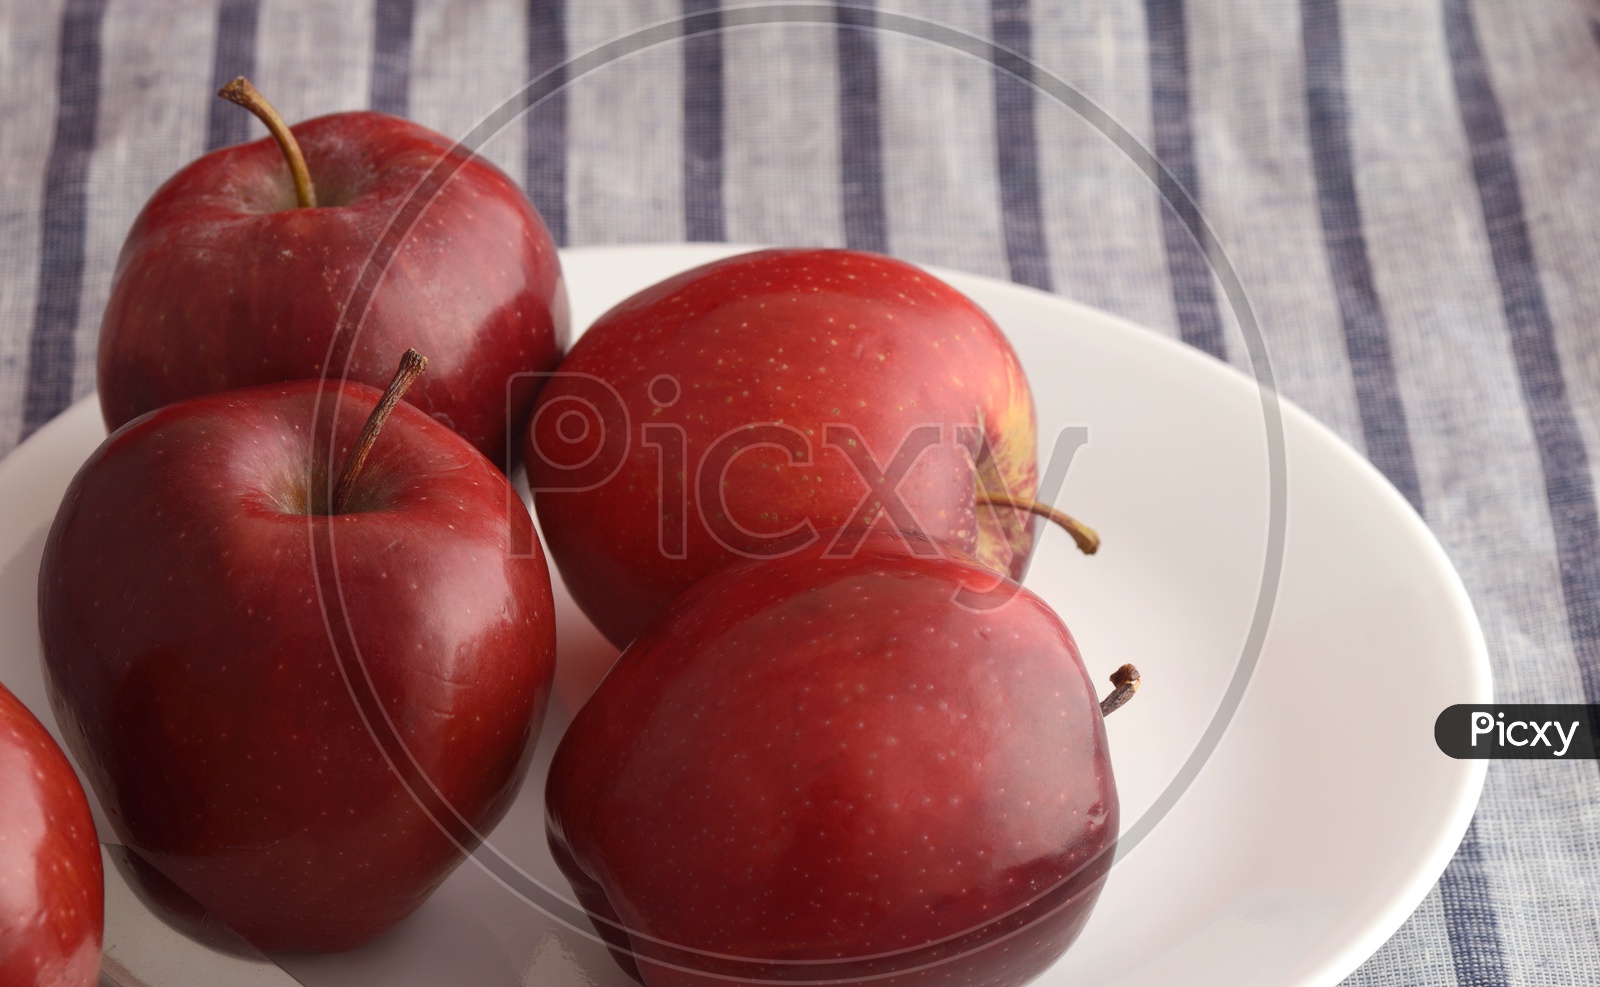 Fresh Red Apples On a White Plate  On an Table Cloth Background